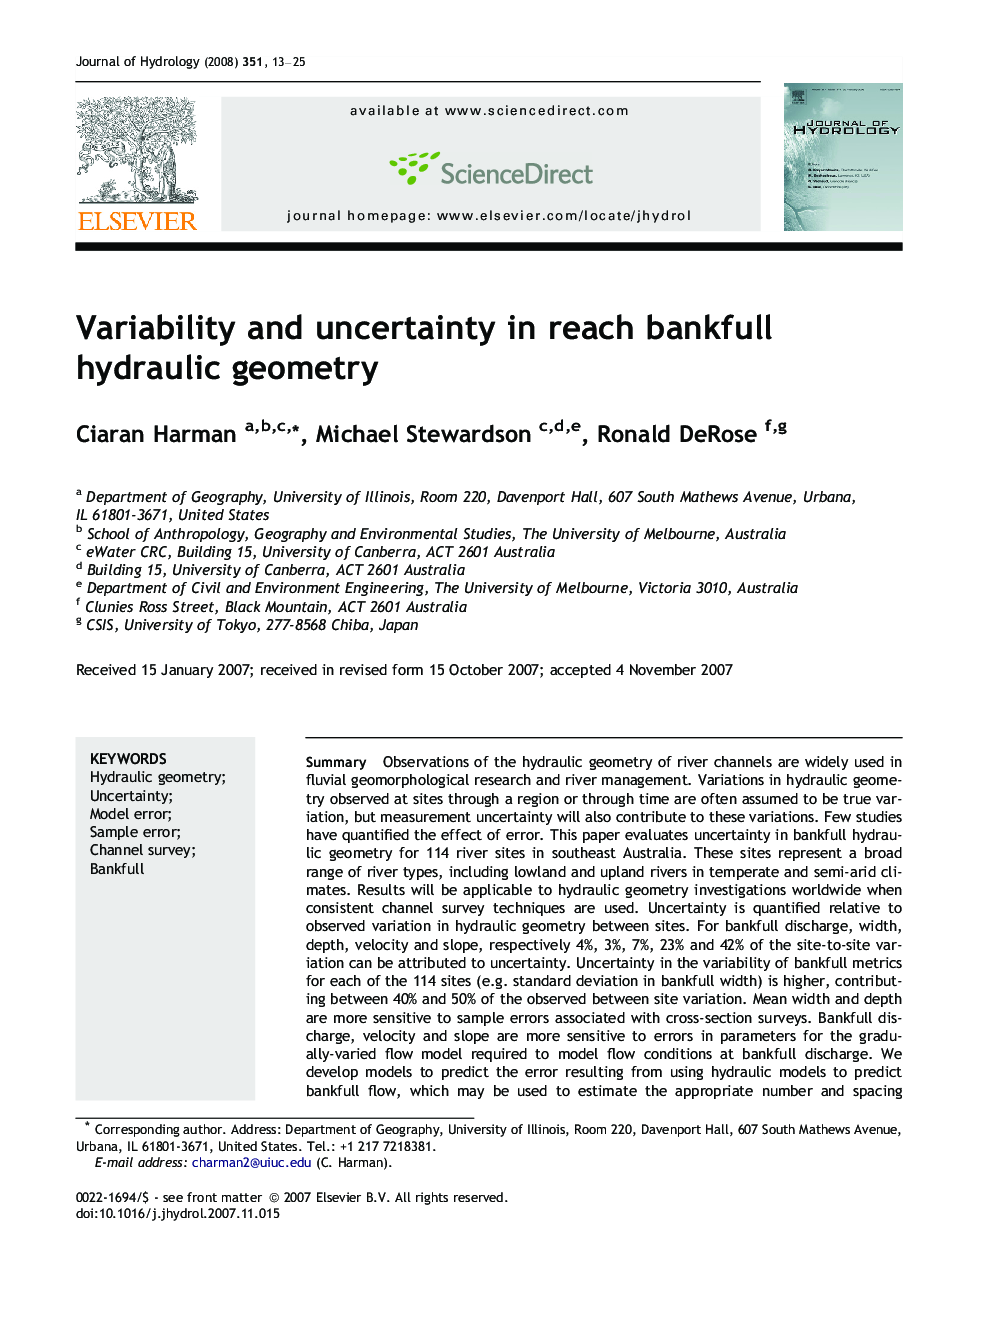 Variability and uncertainty in reach bankfull hydraulic geometry